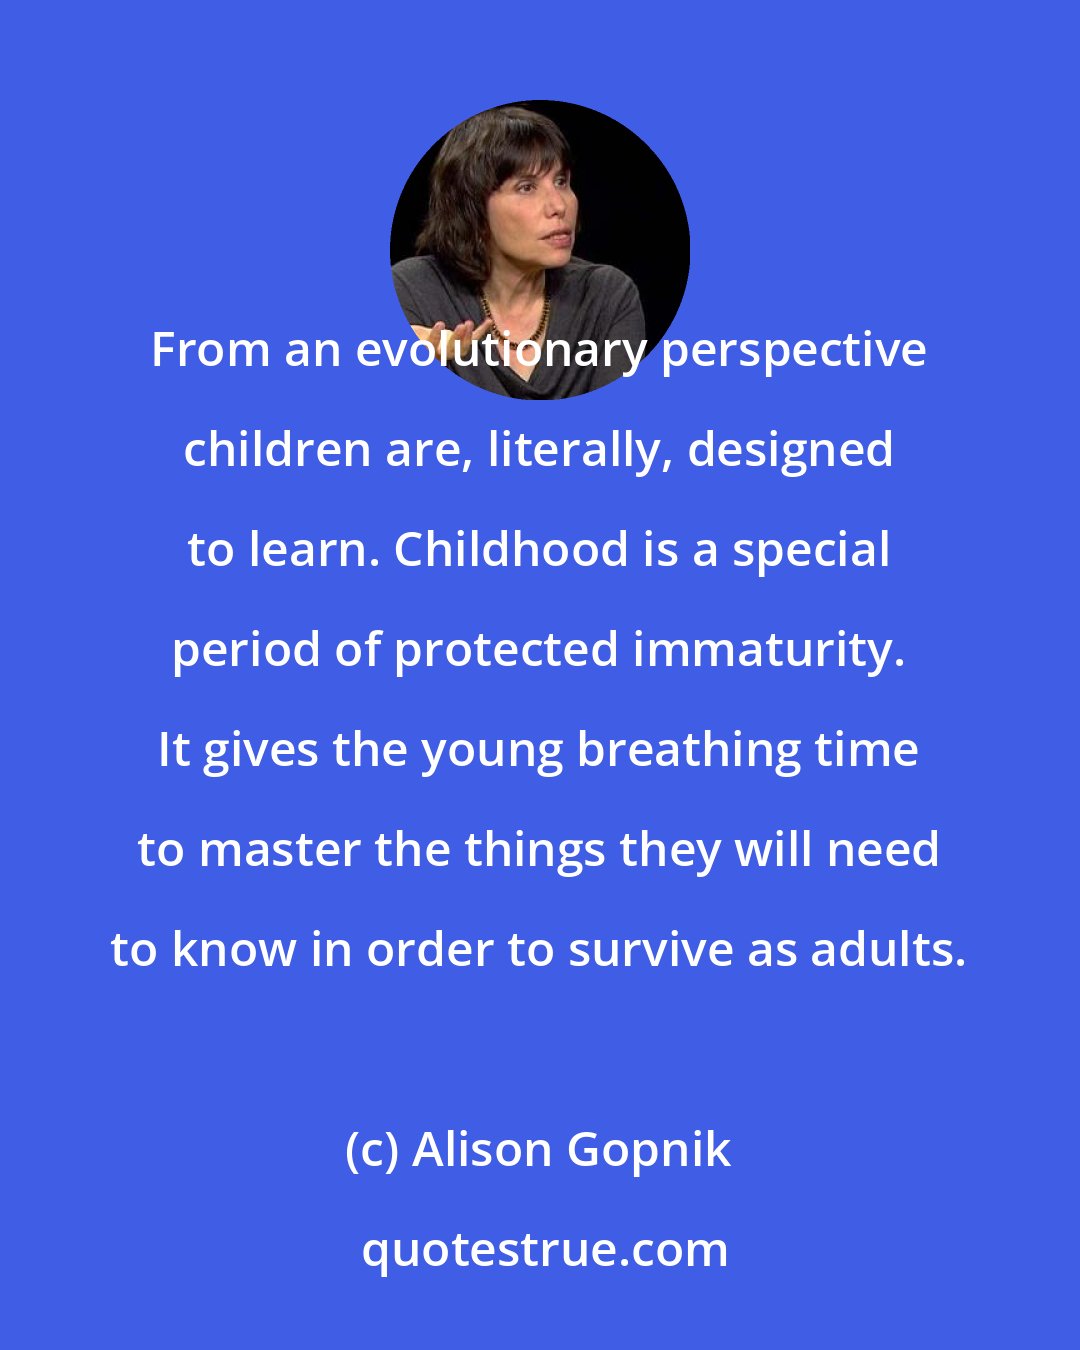 Alison Gopnik: From an evolutionary perspective children are, literally, designed to learn. Childhood is a special period of protected immaturity. It gives the young breathing time to master the things they will need to know in order to survive as adults.